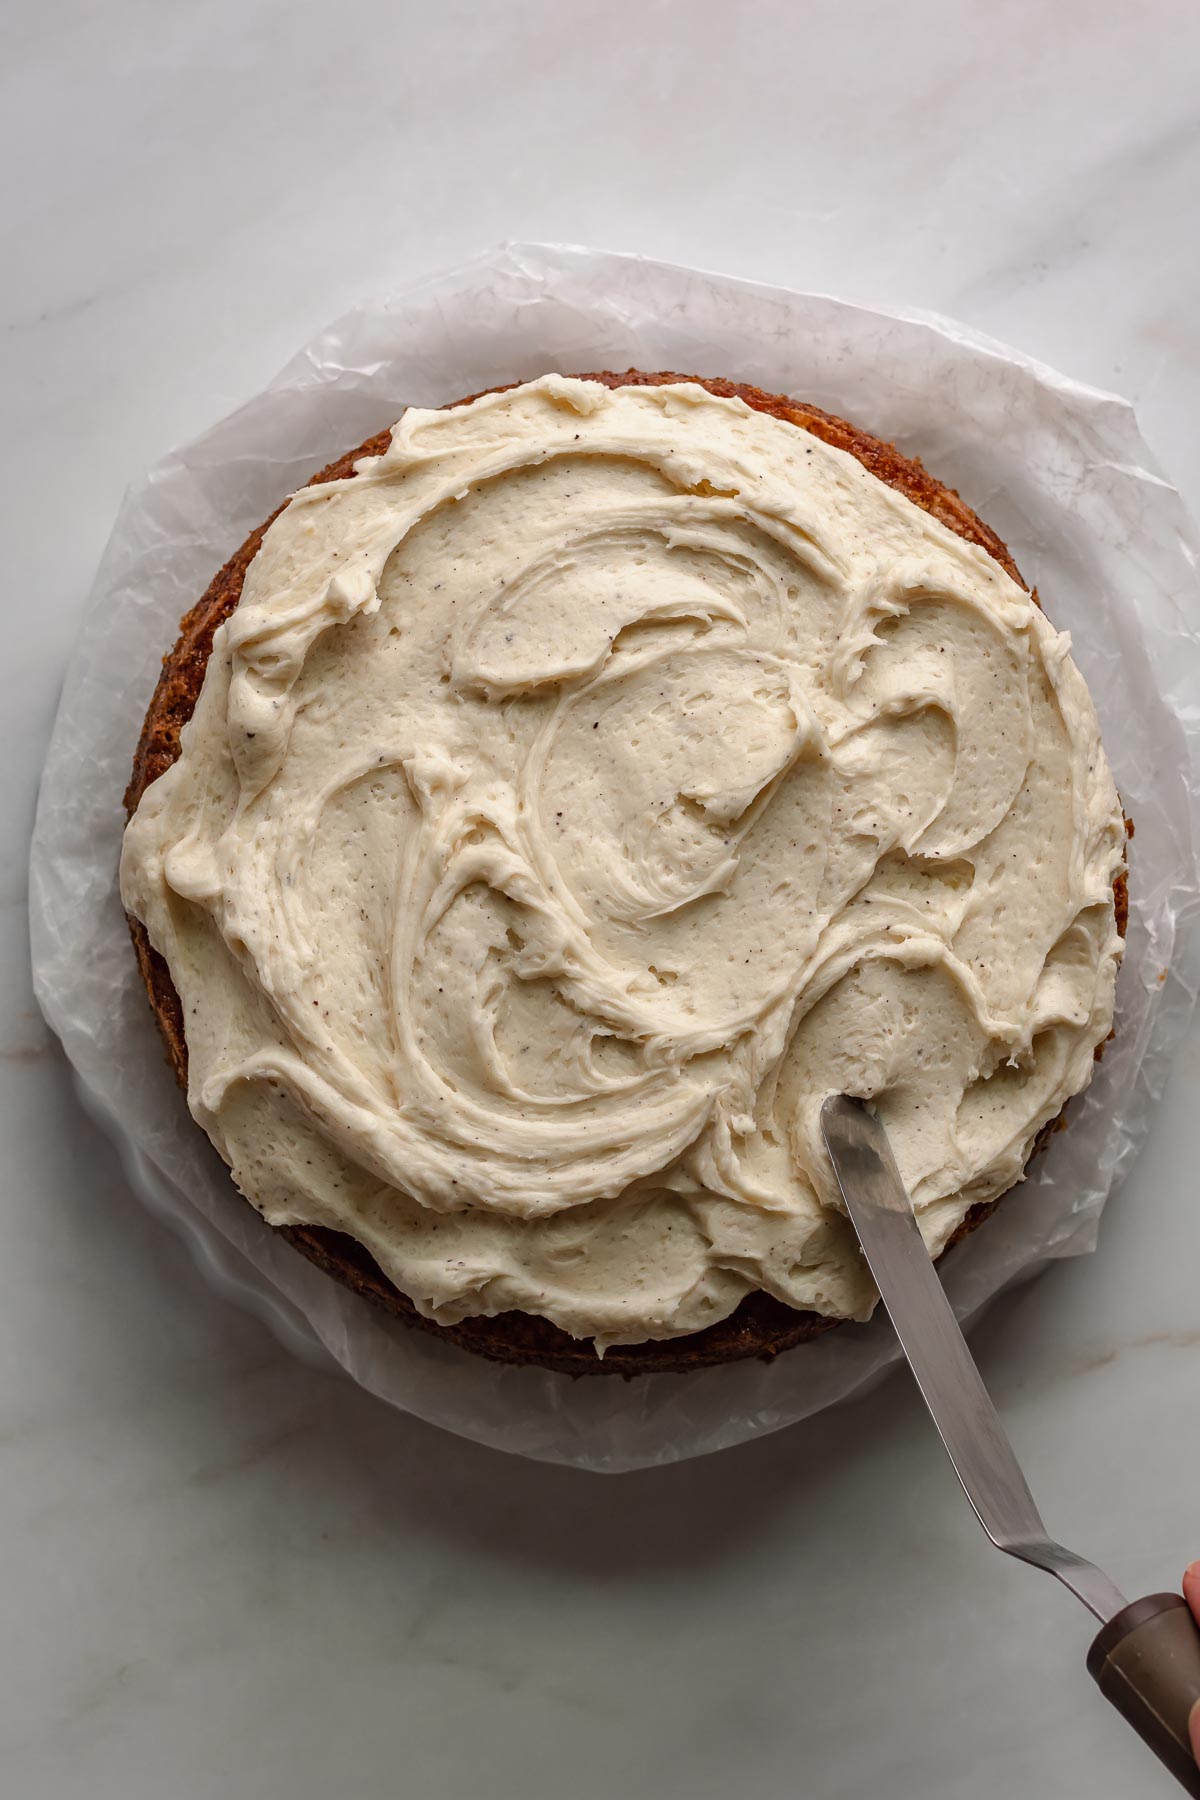 A spatula swoops on the frosting.